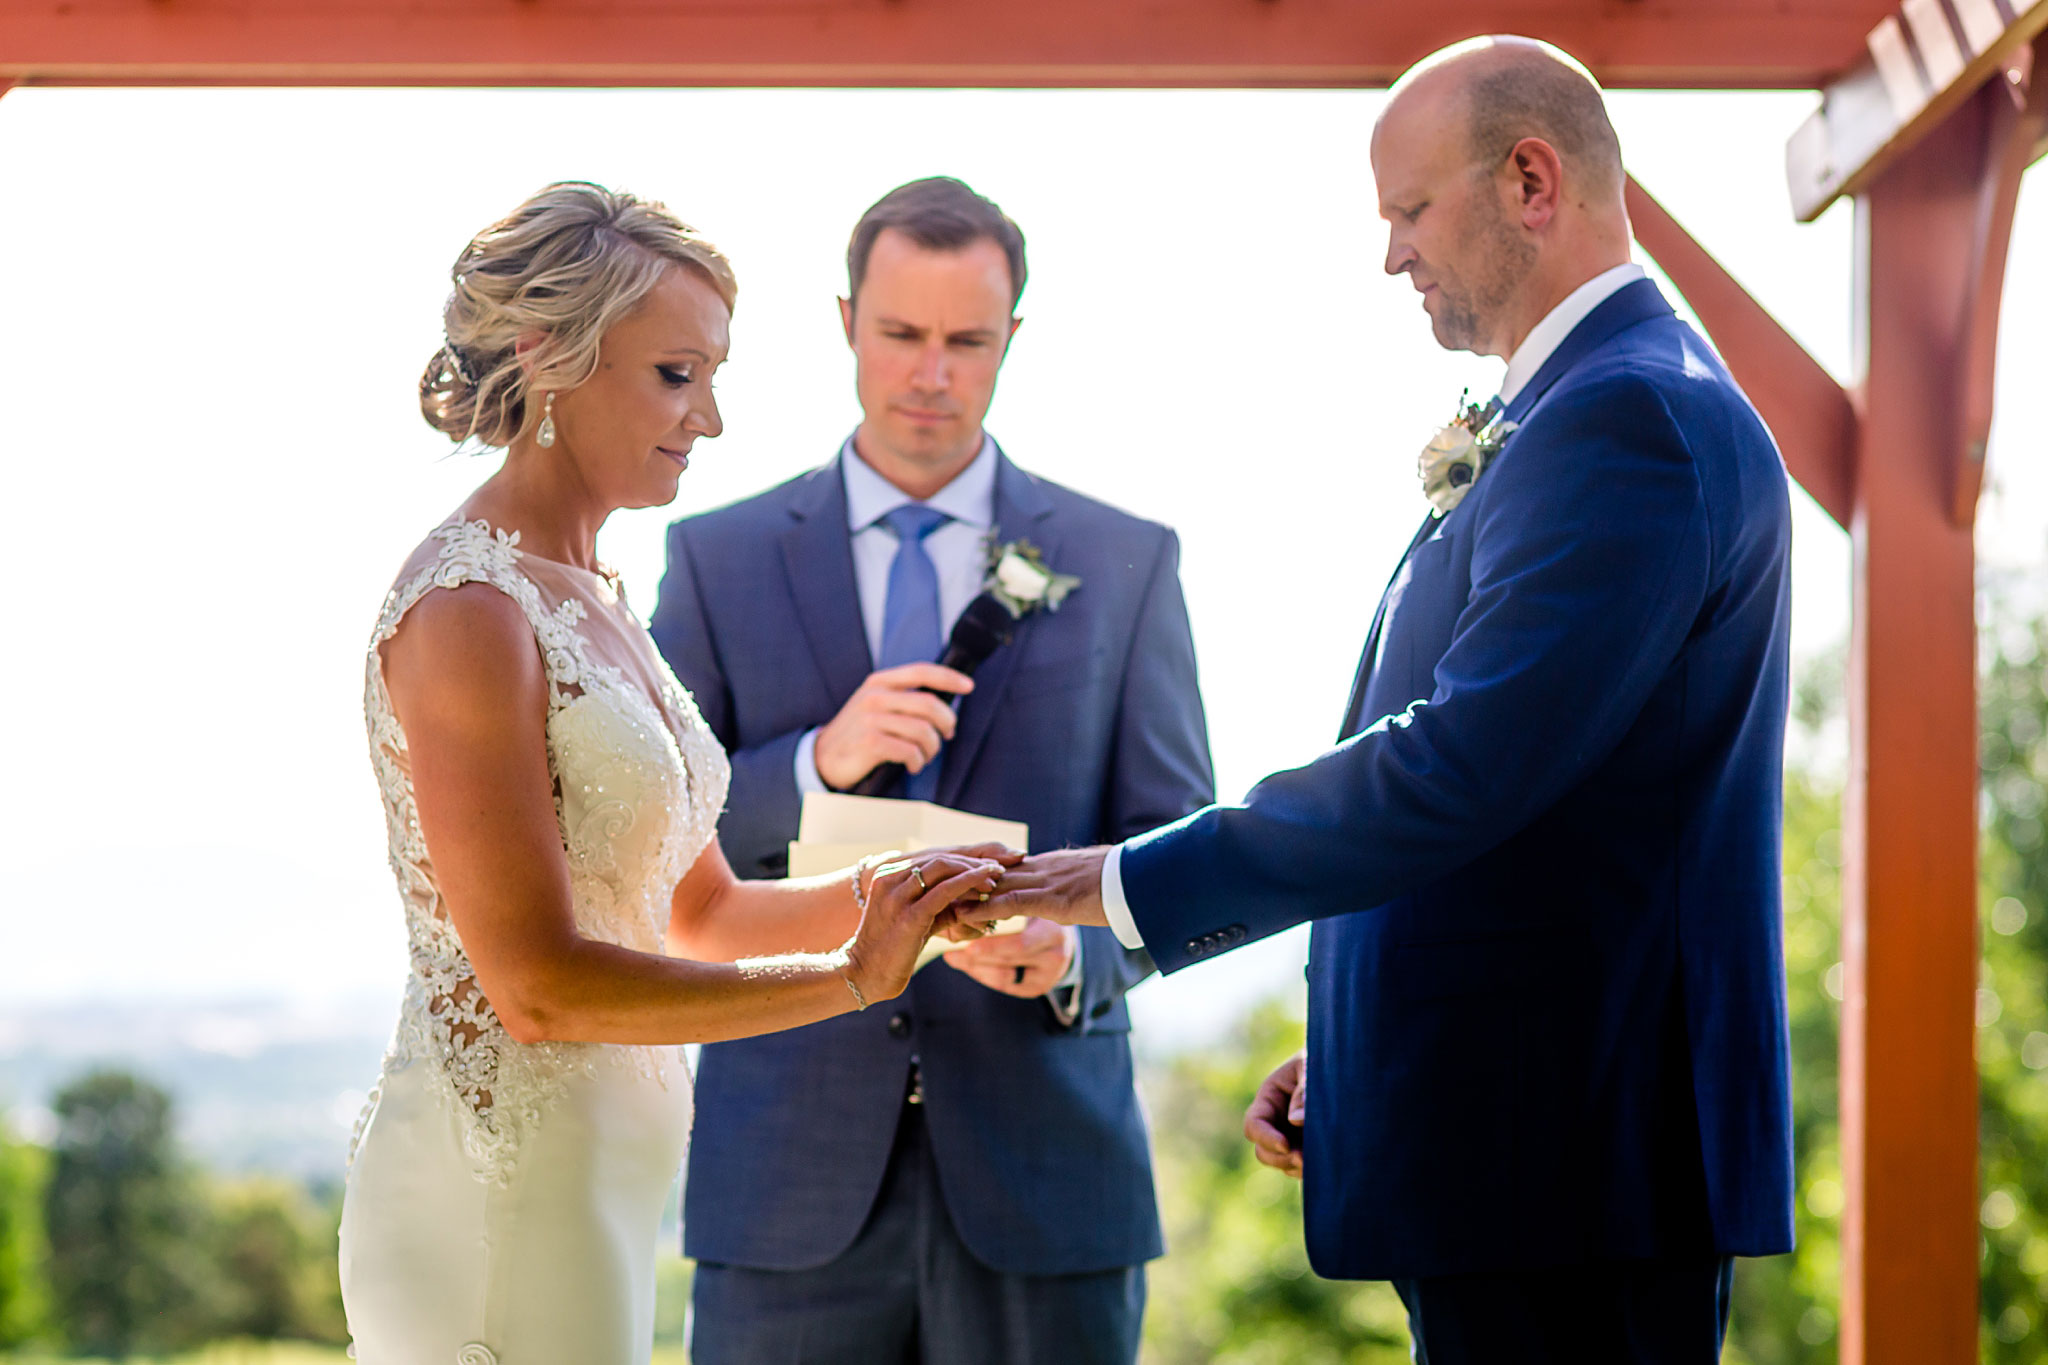 Bride and Groom exchanging rings. Kelli & Jason's golf course wedding at The Ranch Country Club by Colorado Wedding Photographer Jennifer Garza, Small wedding ideas, Intimate wedding, Golf Course Wedding, Country Club Wedding, Summer Wedding, Golf Wedding, Wedding planning, Colorado Wedding Photographer, Colorado Elopement Photographer, Colorado Elopement, Colorado Wedding, Denver Wedding Photographer, Denver Wedding, Wedding Inspiration, Summer Wedding Inspiration, Covid Wedding, Colorado Bride